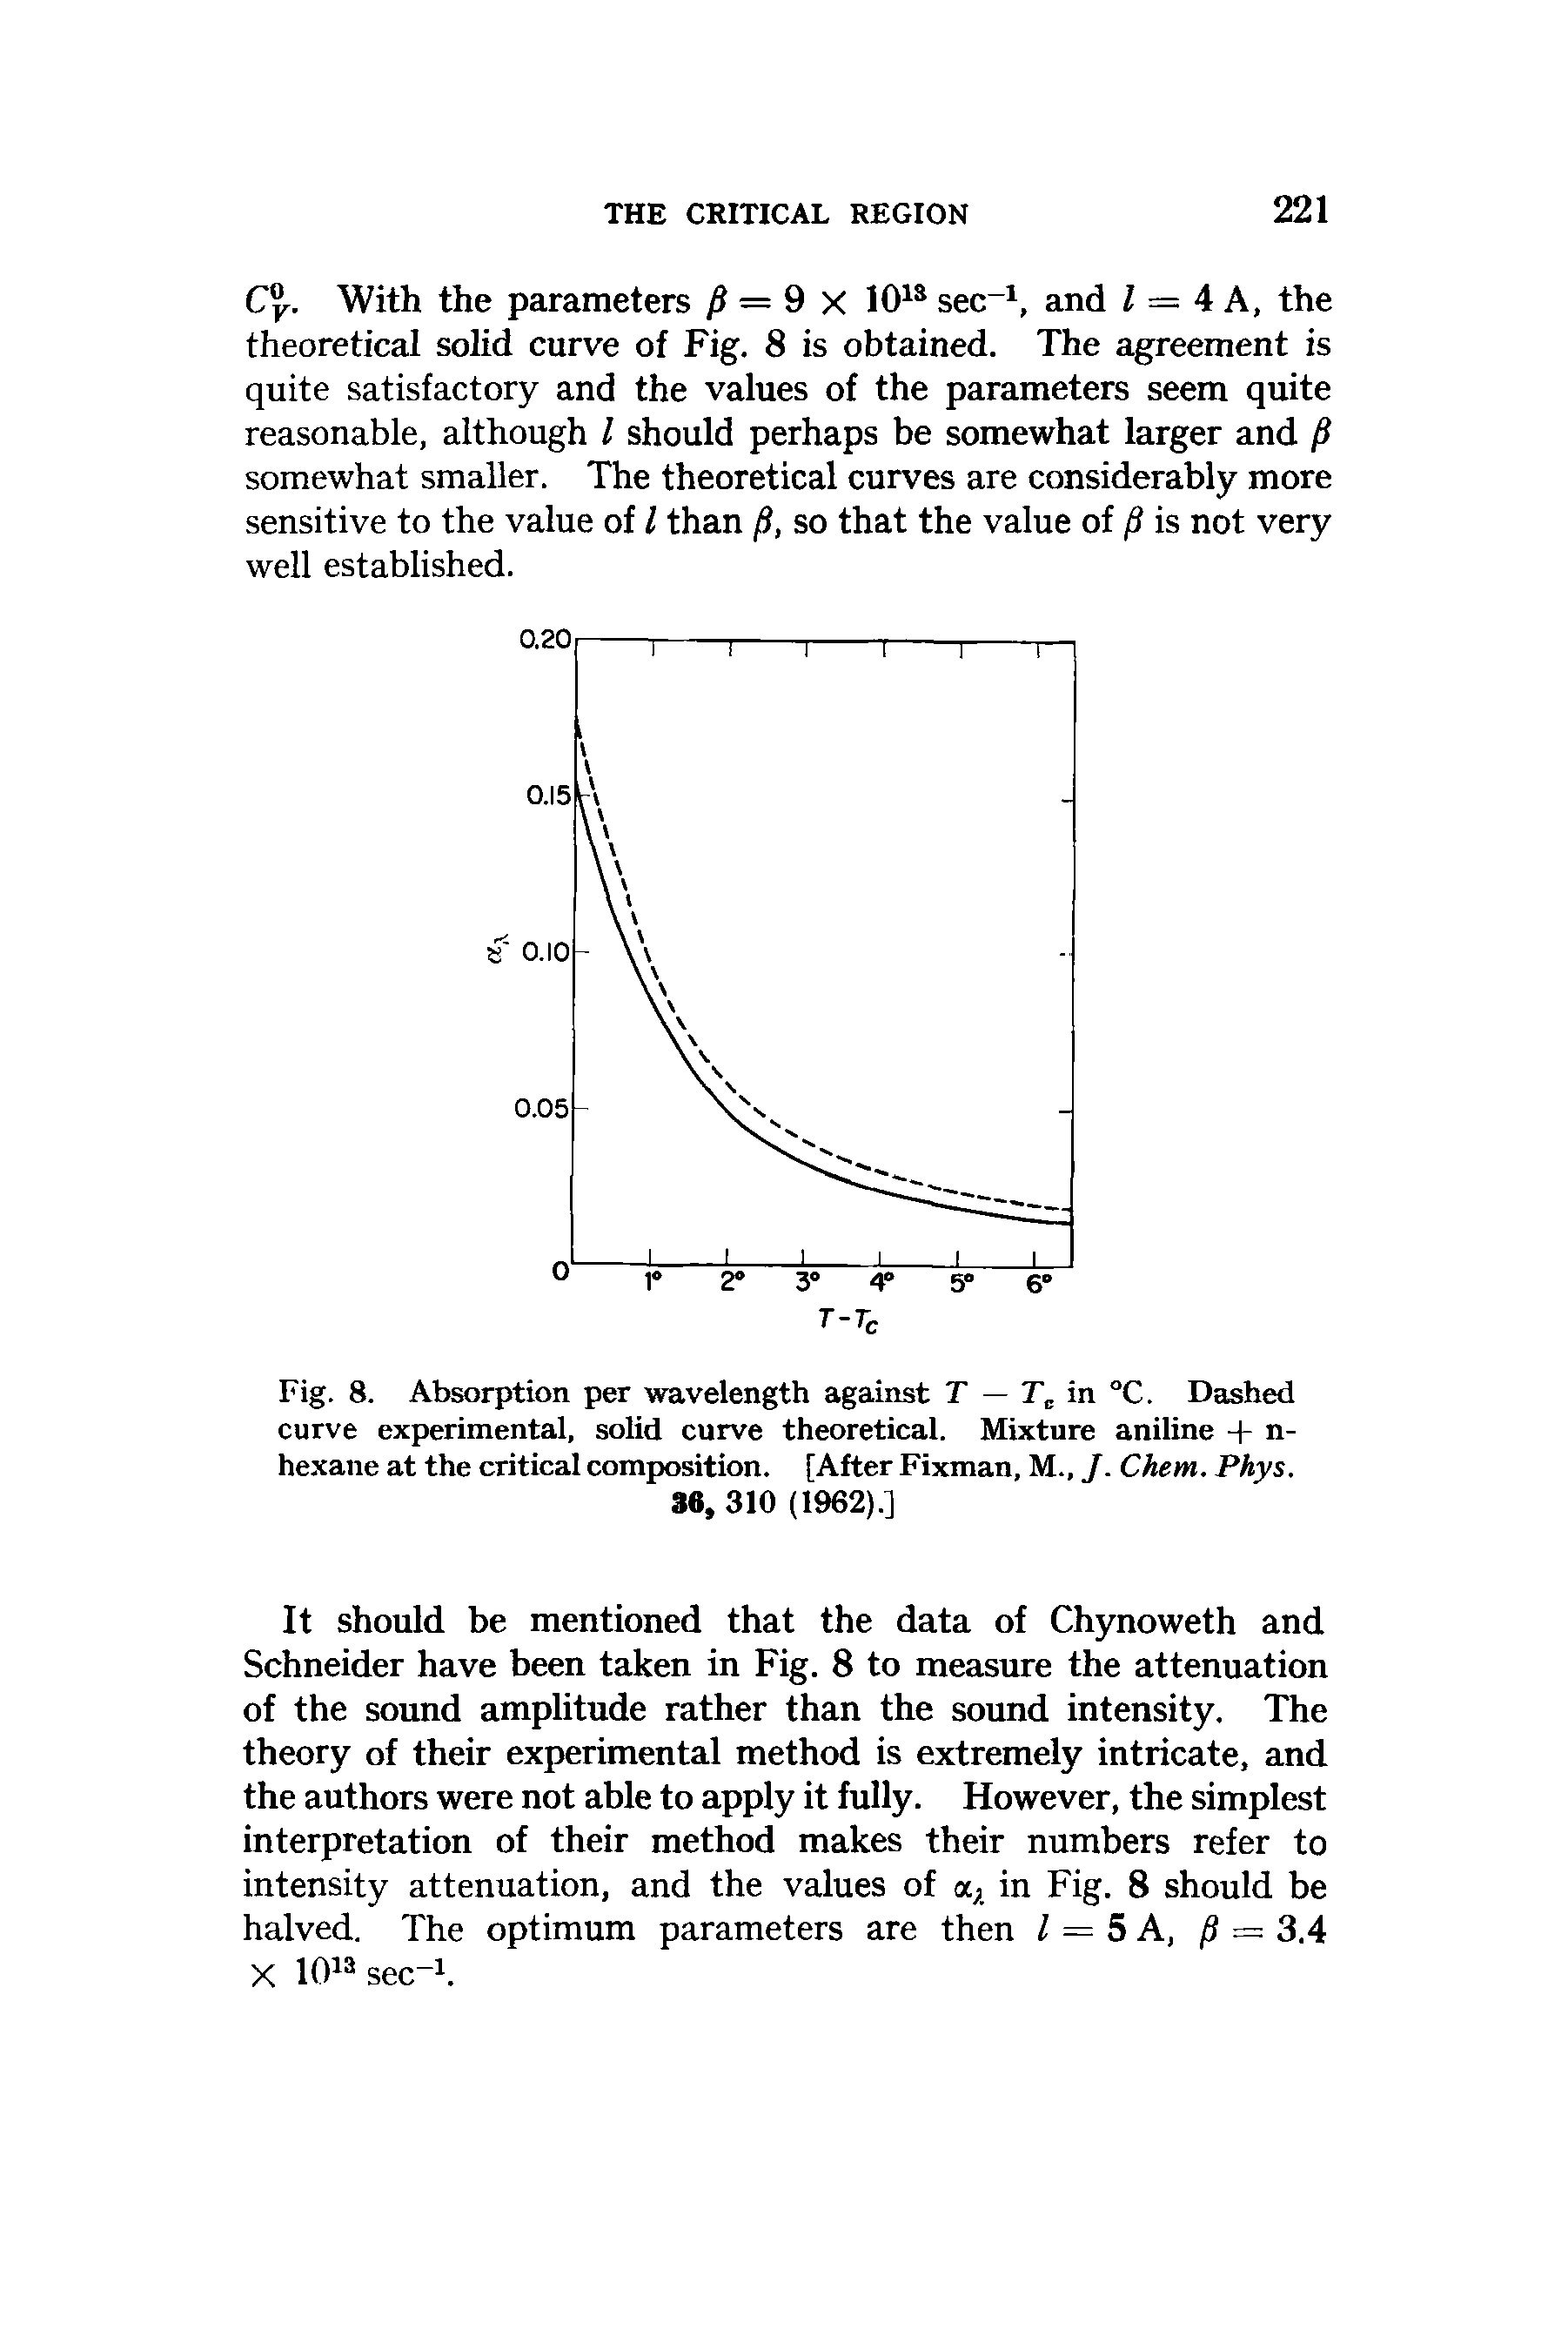 Fig. 8. Absorption per wavelength against T — in C. Dashed curve experimental, solid curve theoretical. Mixture aniline + n-hexane at the critical composition. [After Fixman, M., J. Chem. Phys.